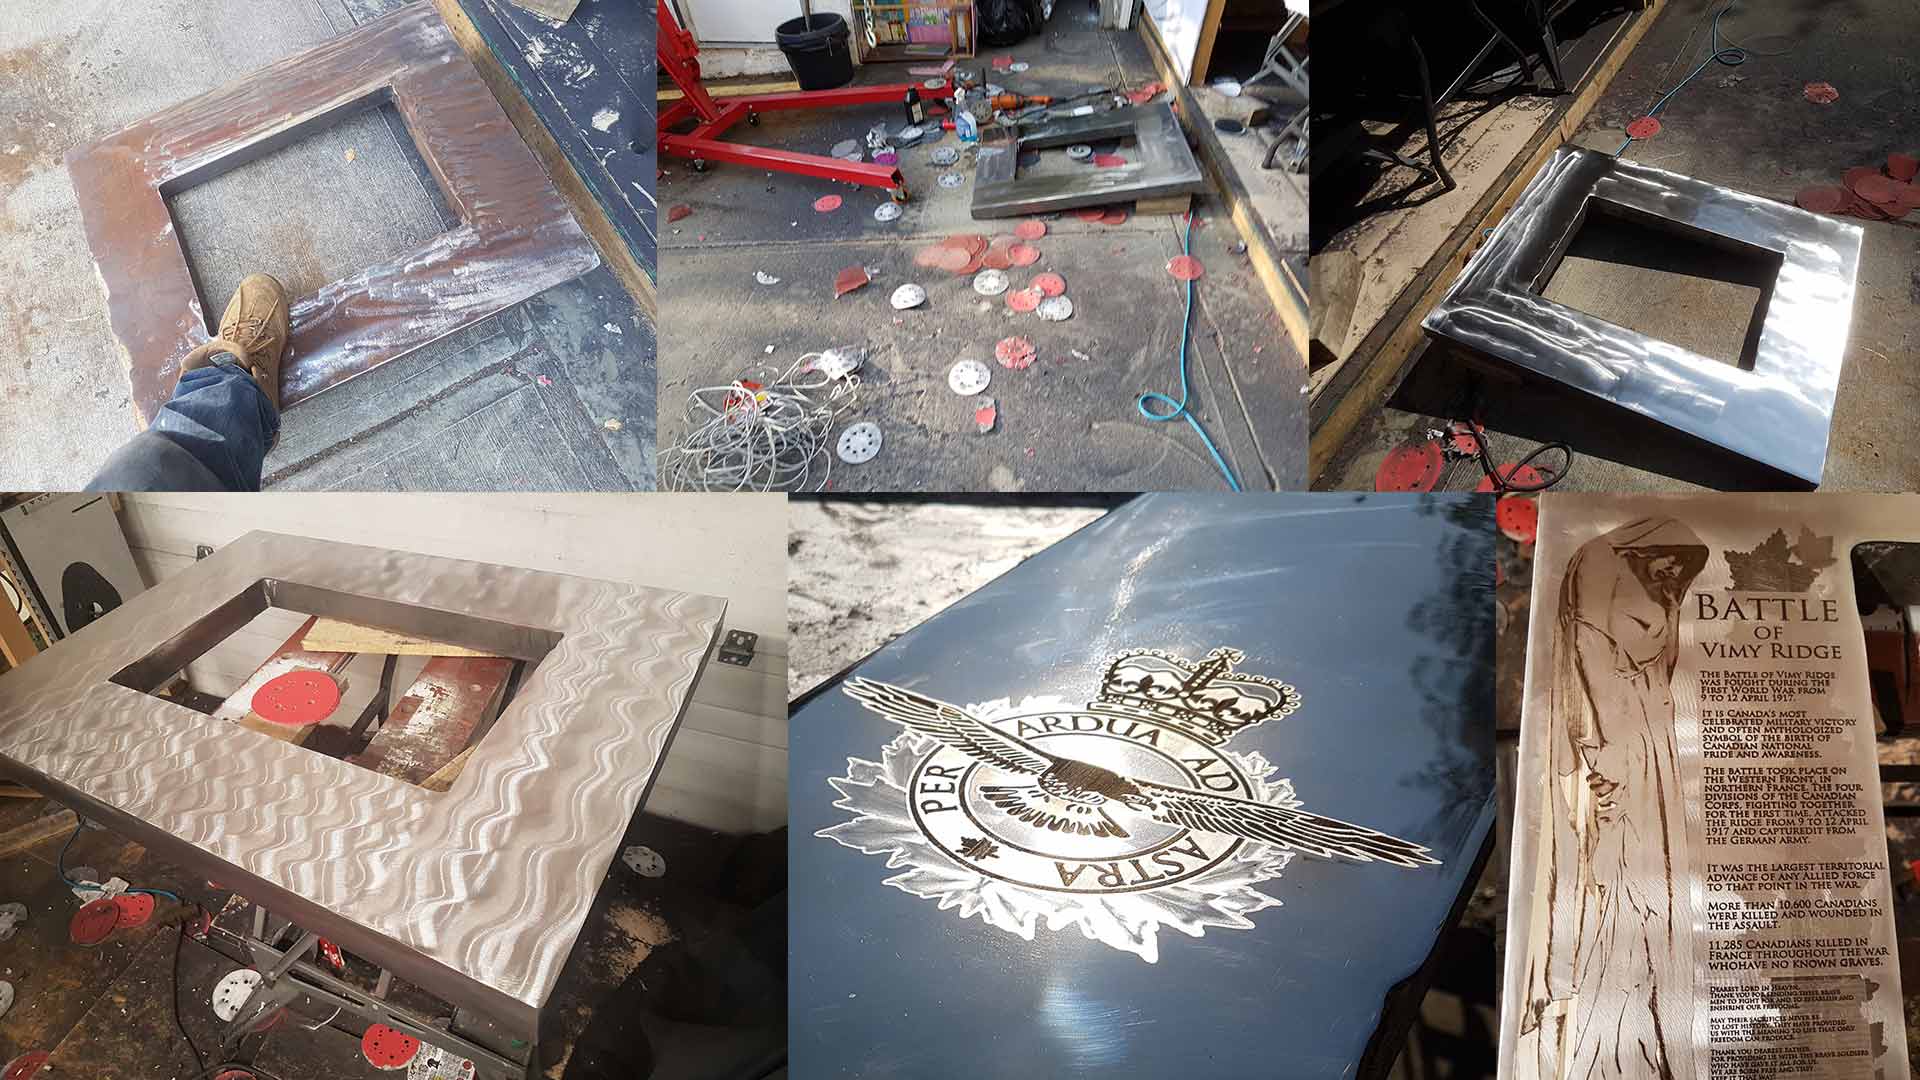 It took about 3 months to source the steel plate, get it cut, then the protective scale on the steel was ground off, then polished to a mirror finish. If we were expected to produce world class coins, then the press must look the part. Once it was finished, we then laser engraved the first side dedicated to the RCAF, then the other side dedicated to those we lost at Vimy Ridge. During this point, our laser failed and it took a couple of months for a replacement to be shipped.